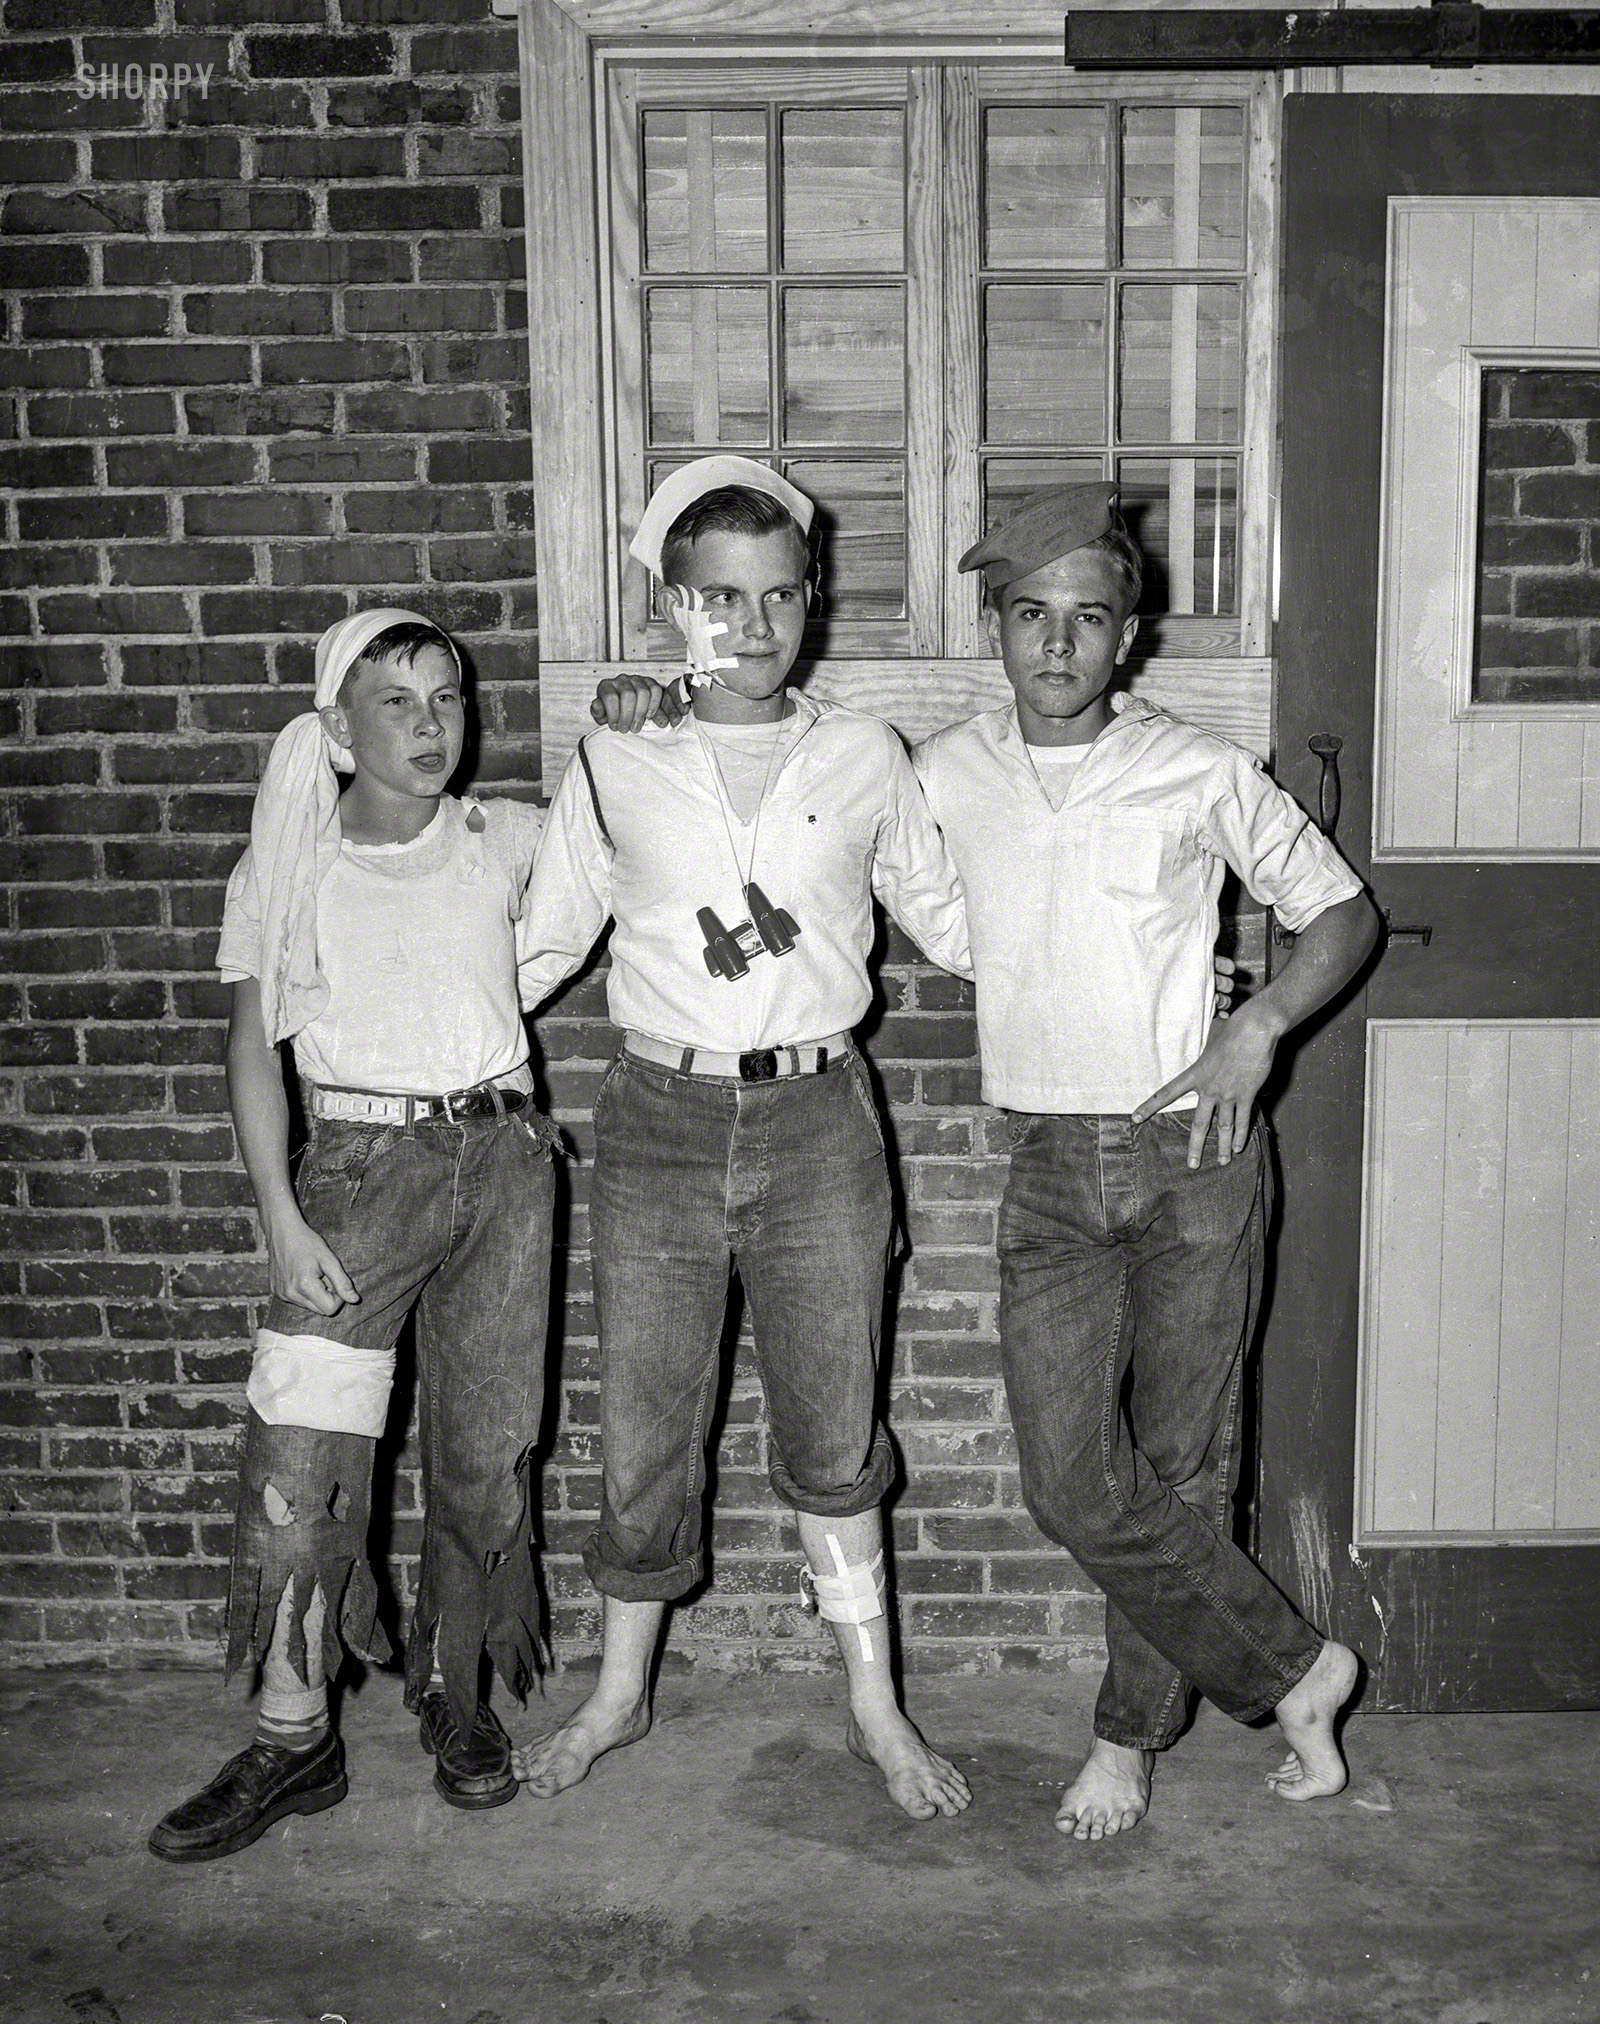 Columbus, Georgia, circa 1948. "Philip Schley" and "Musketeers" is all it says here. Hide your women and lock up the silver! 4x5 acetate negative. View full size.